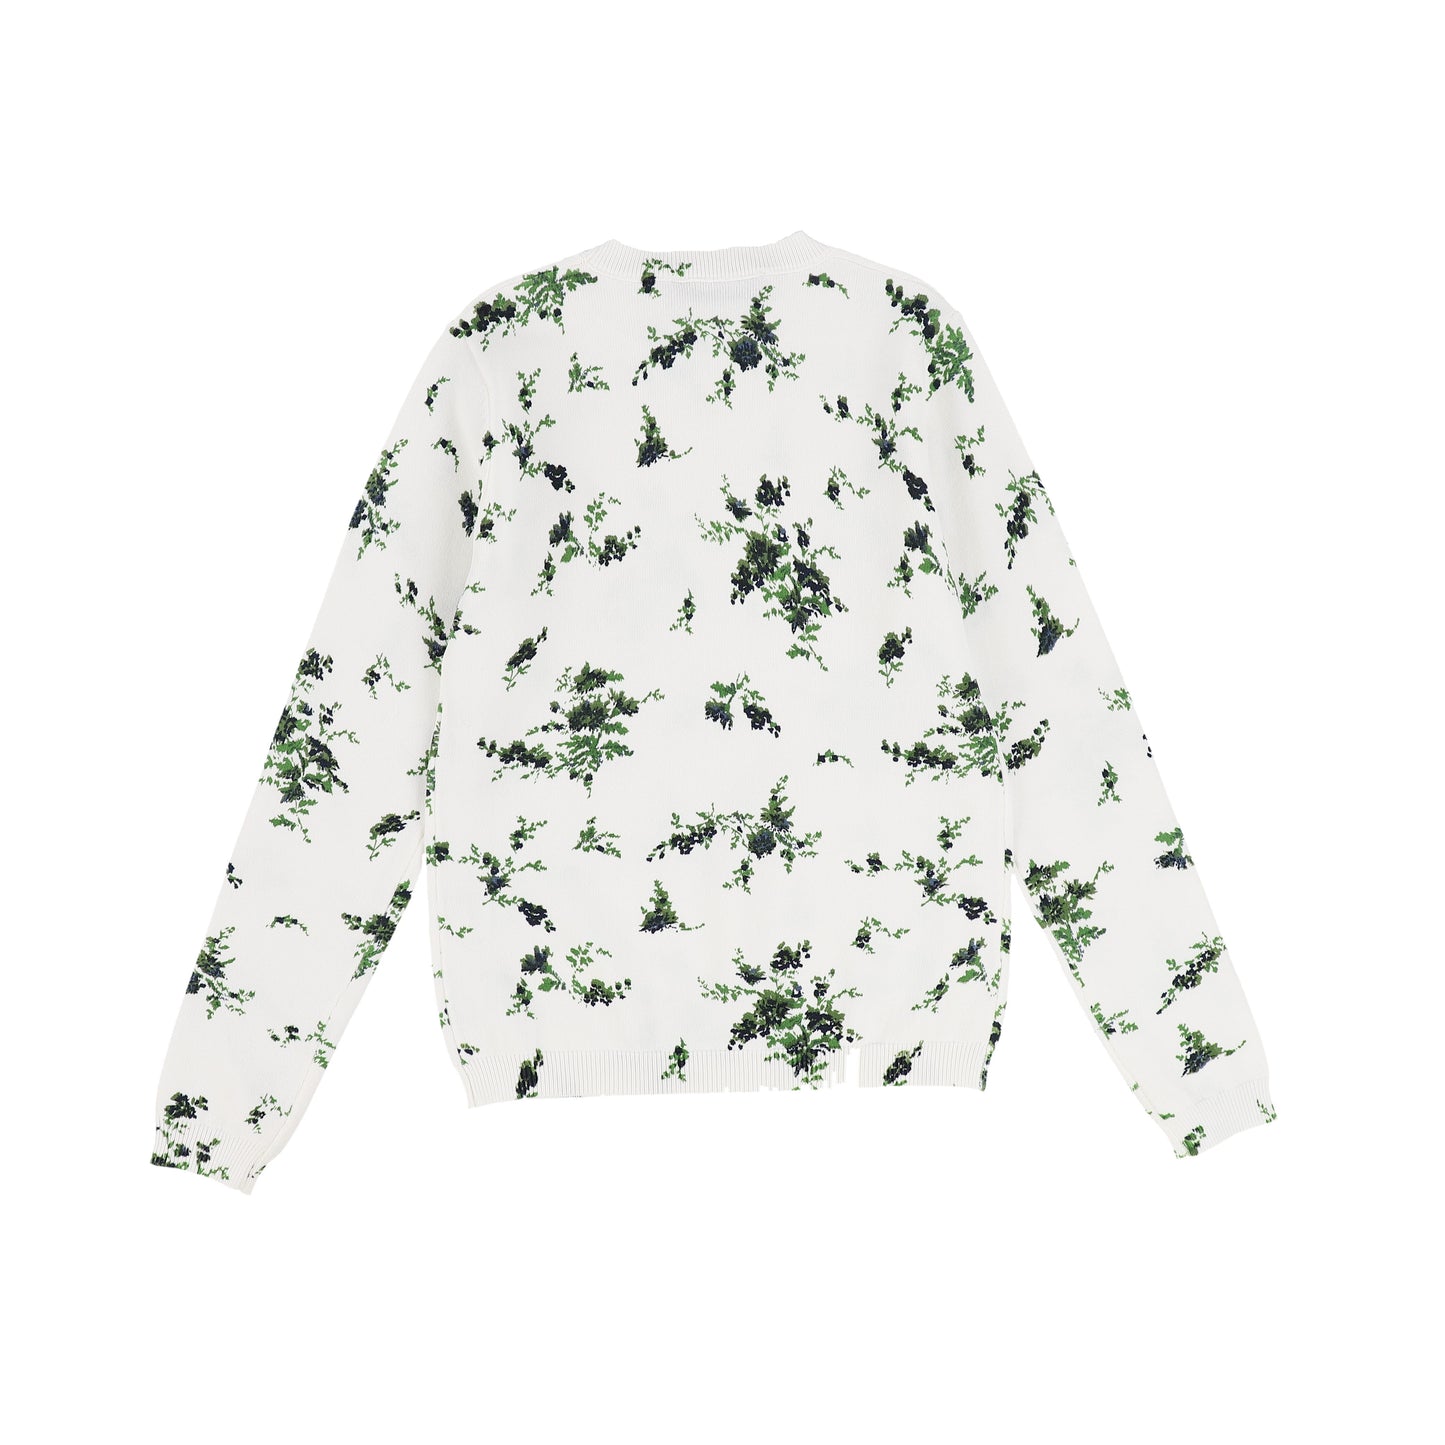 MALLORY AND MERLOT WHITE FLORAL TOP [Final Sale]